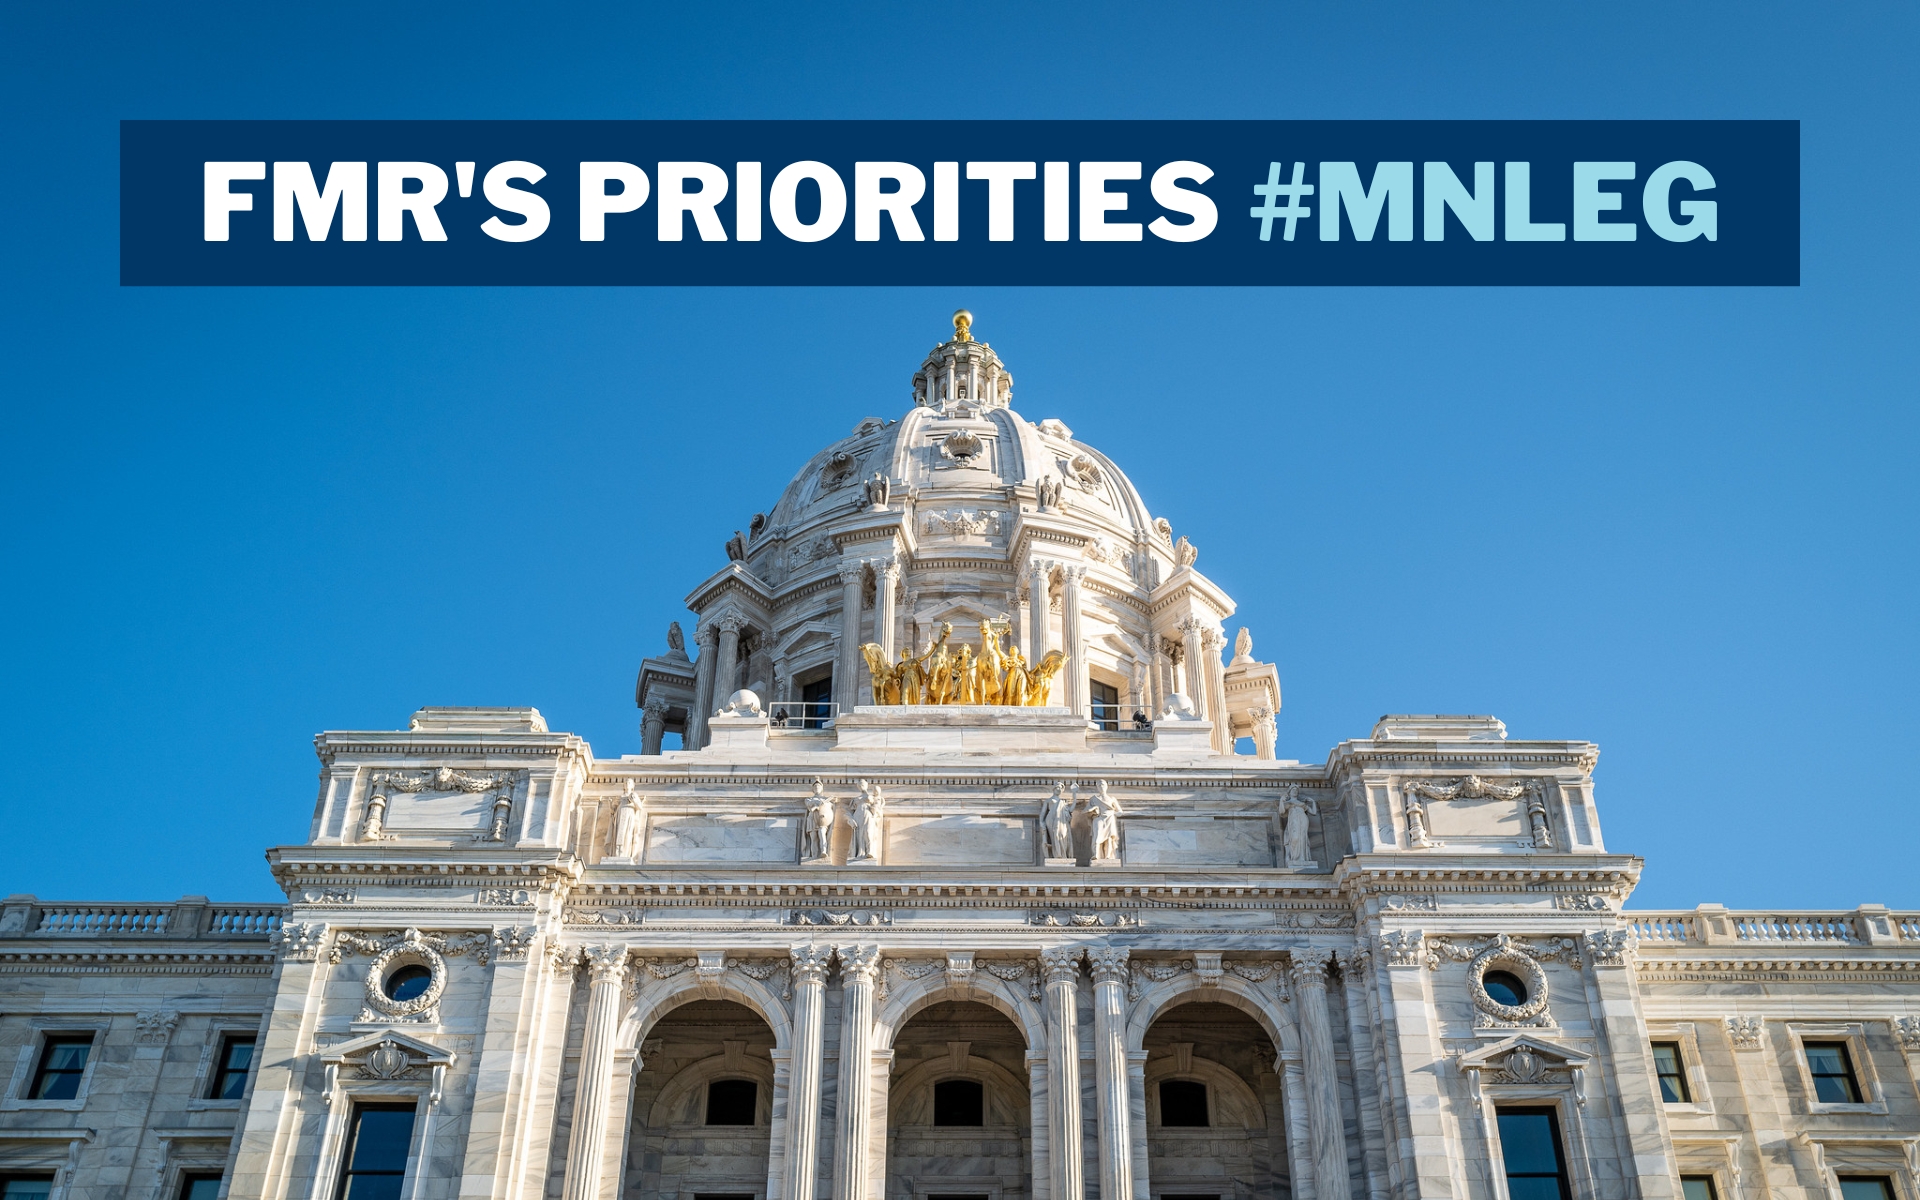 Looking up at the iconic dome of the Capitol building in St. Paul, against a clear blue sky as backdrop. Text over the image says "FMR's priorities #MNLEG"